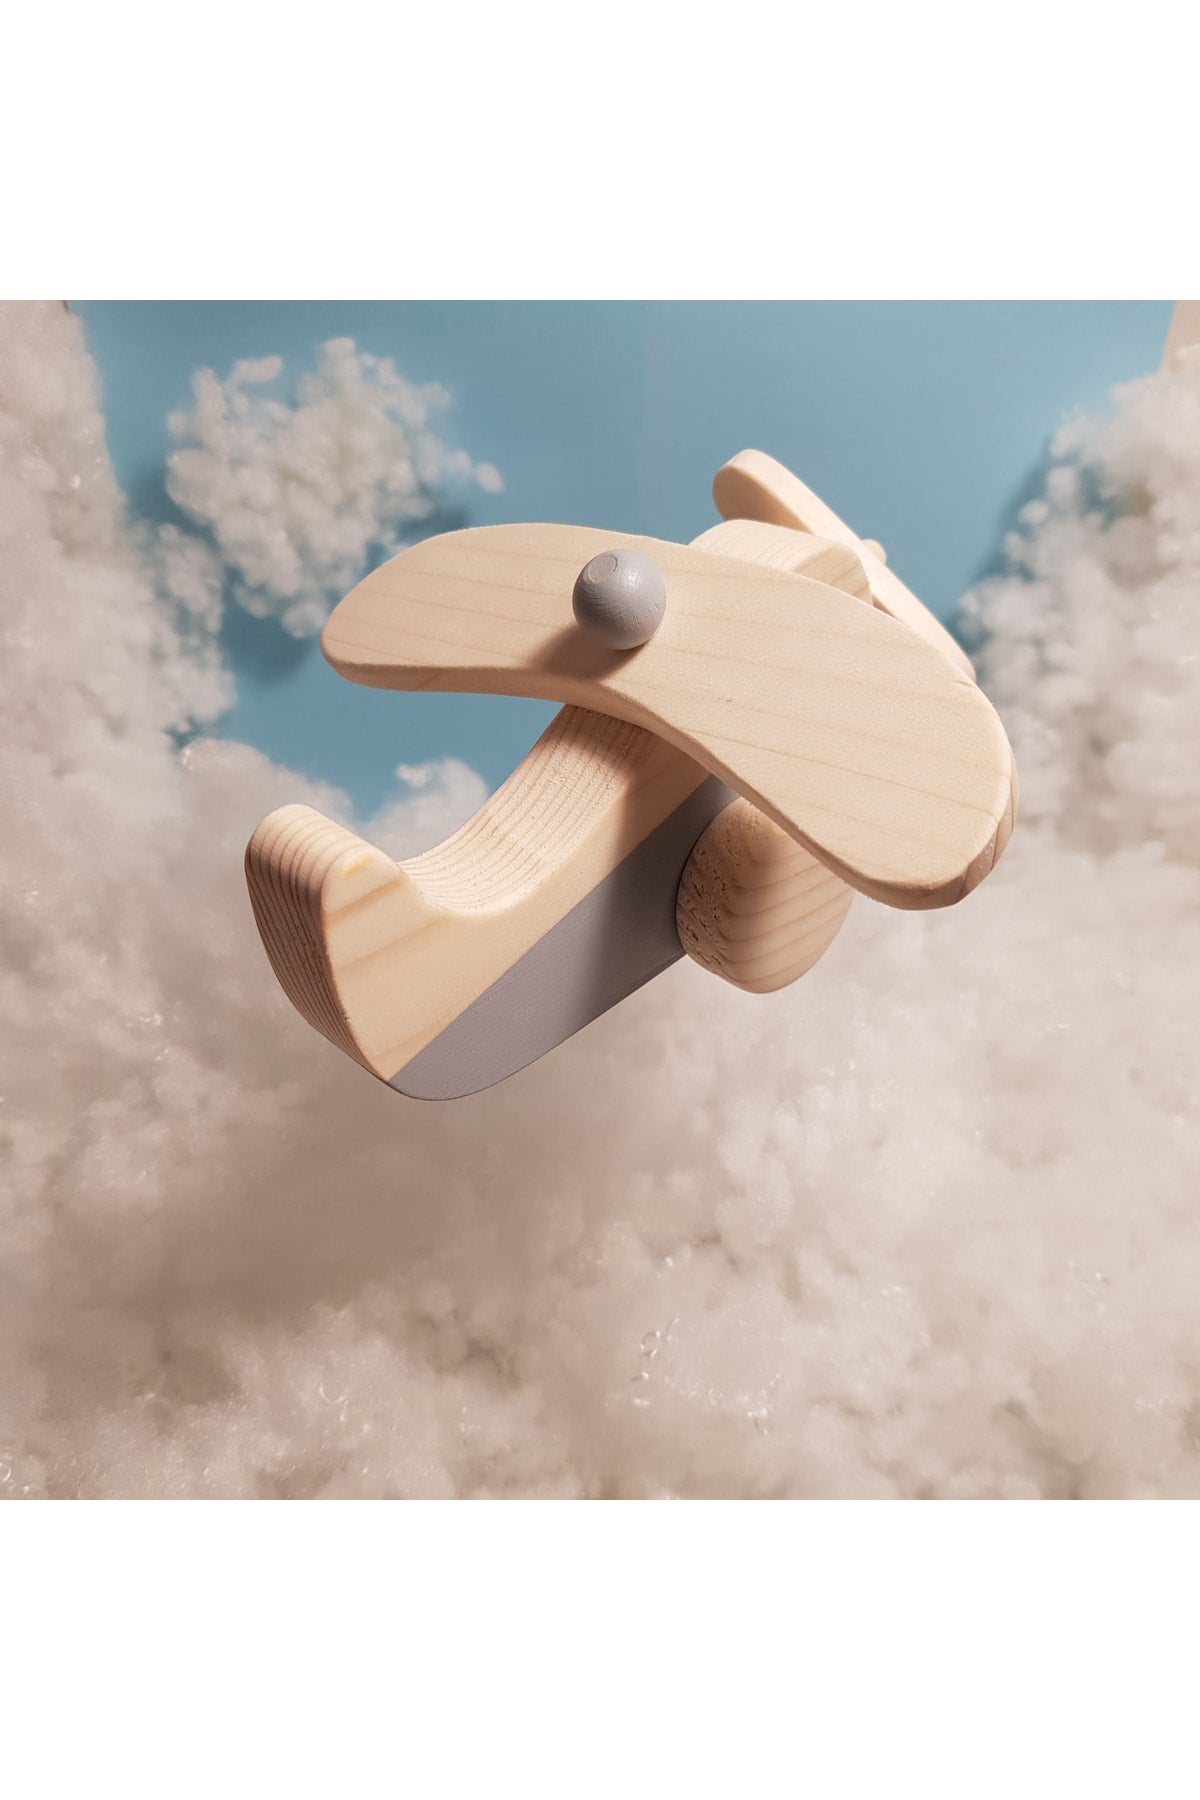 Handmade Wooden Toy Airplane, Educational, Creative, Vintage Natural and Safe Wooden Baby Toy